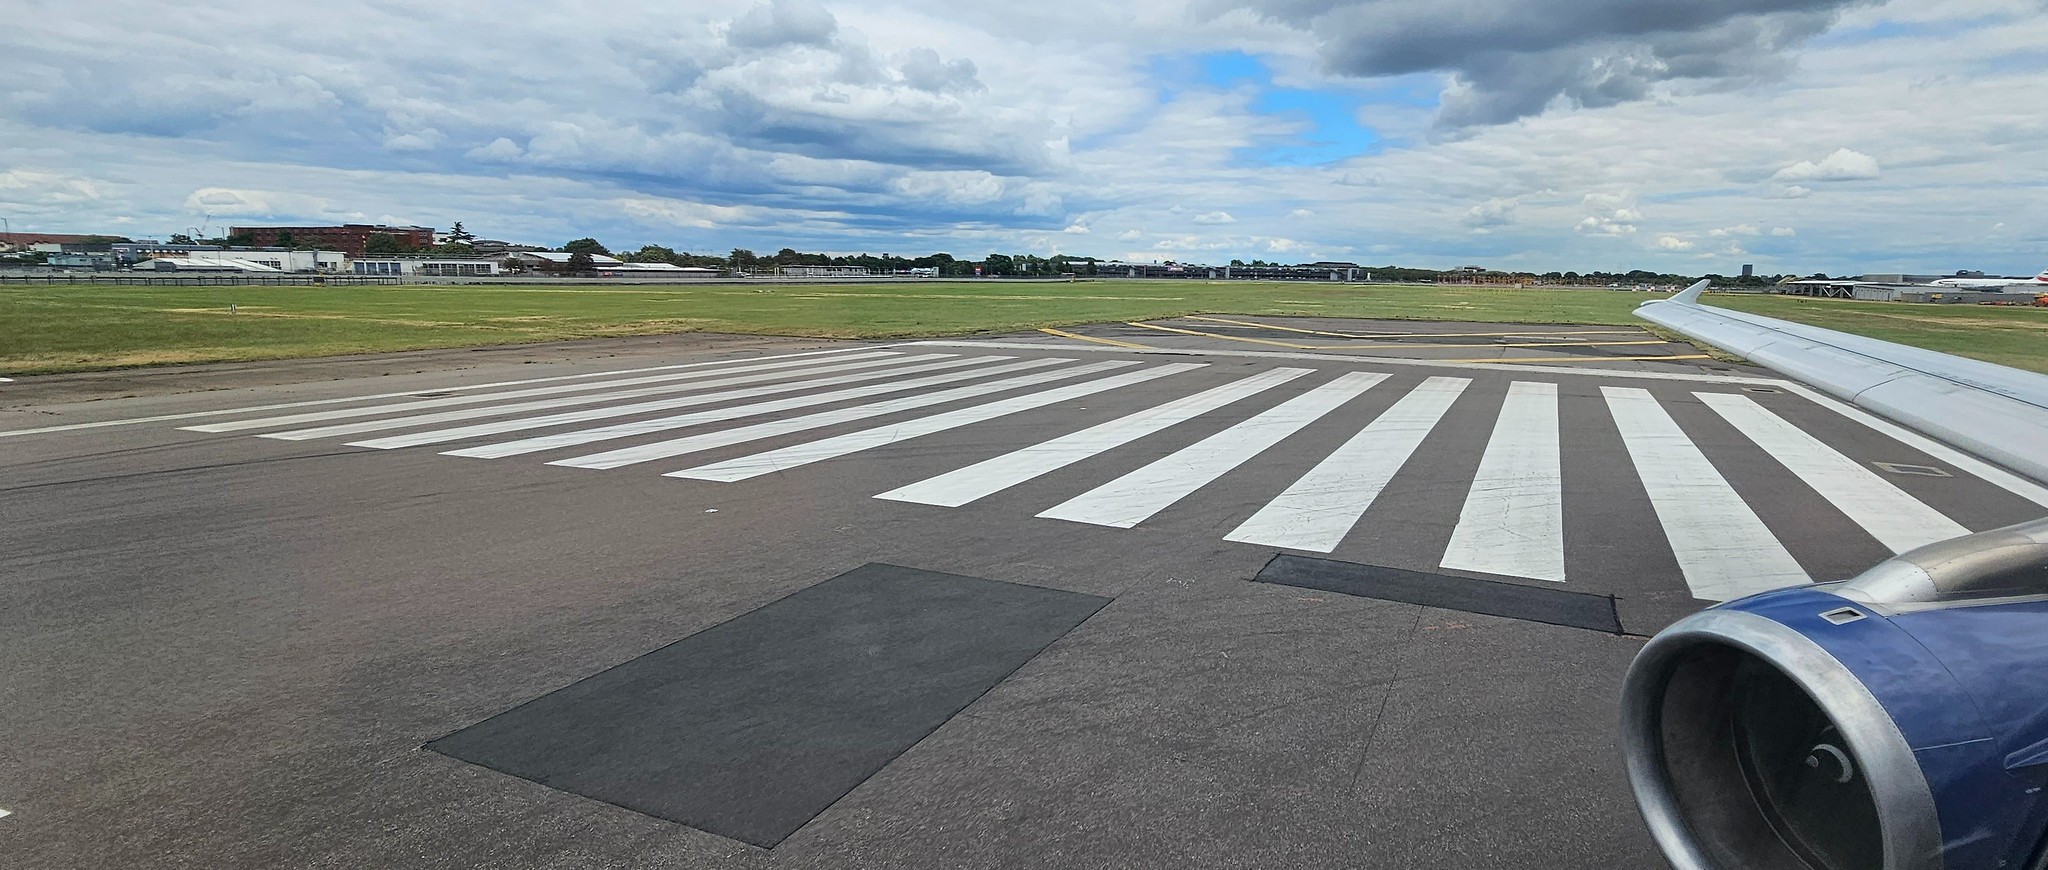 The start of one of the runways at Heathrow